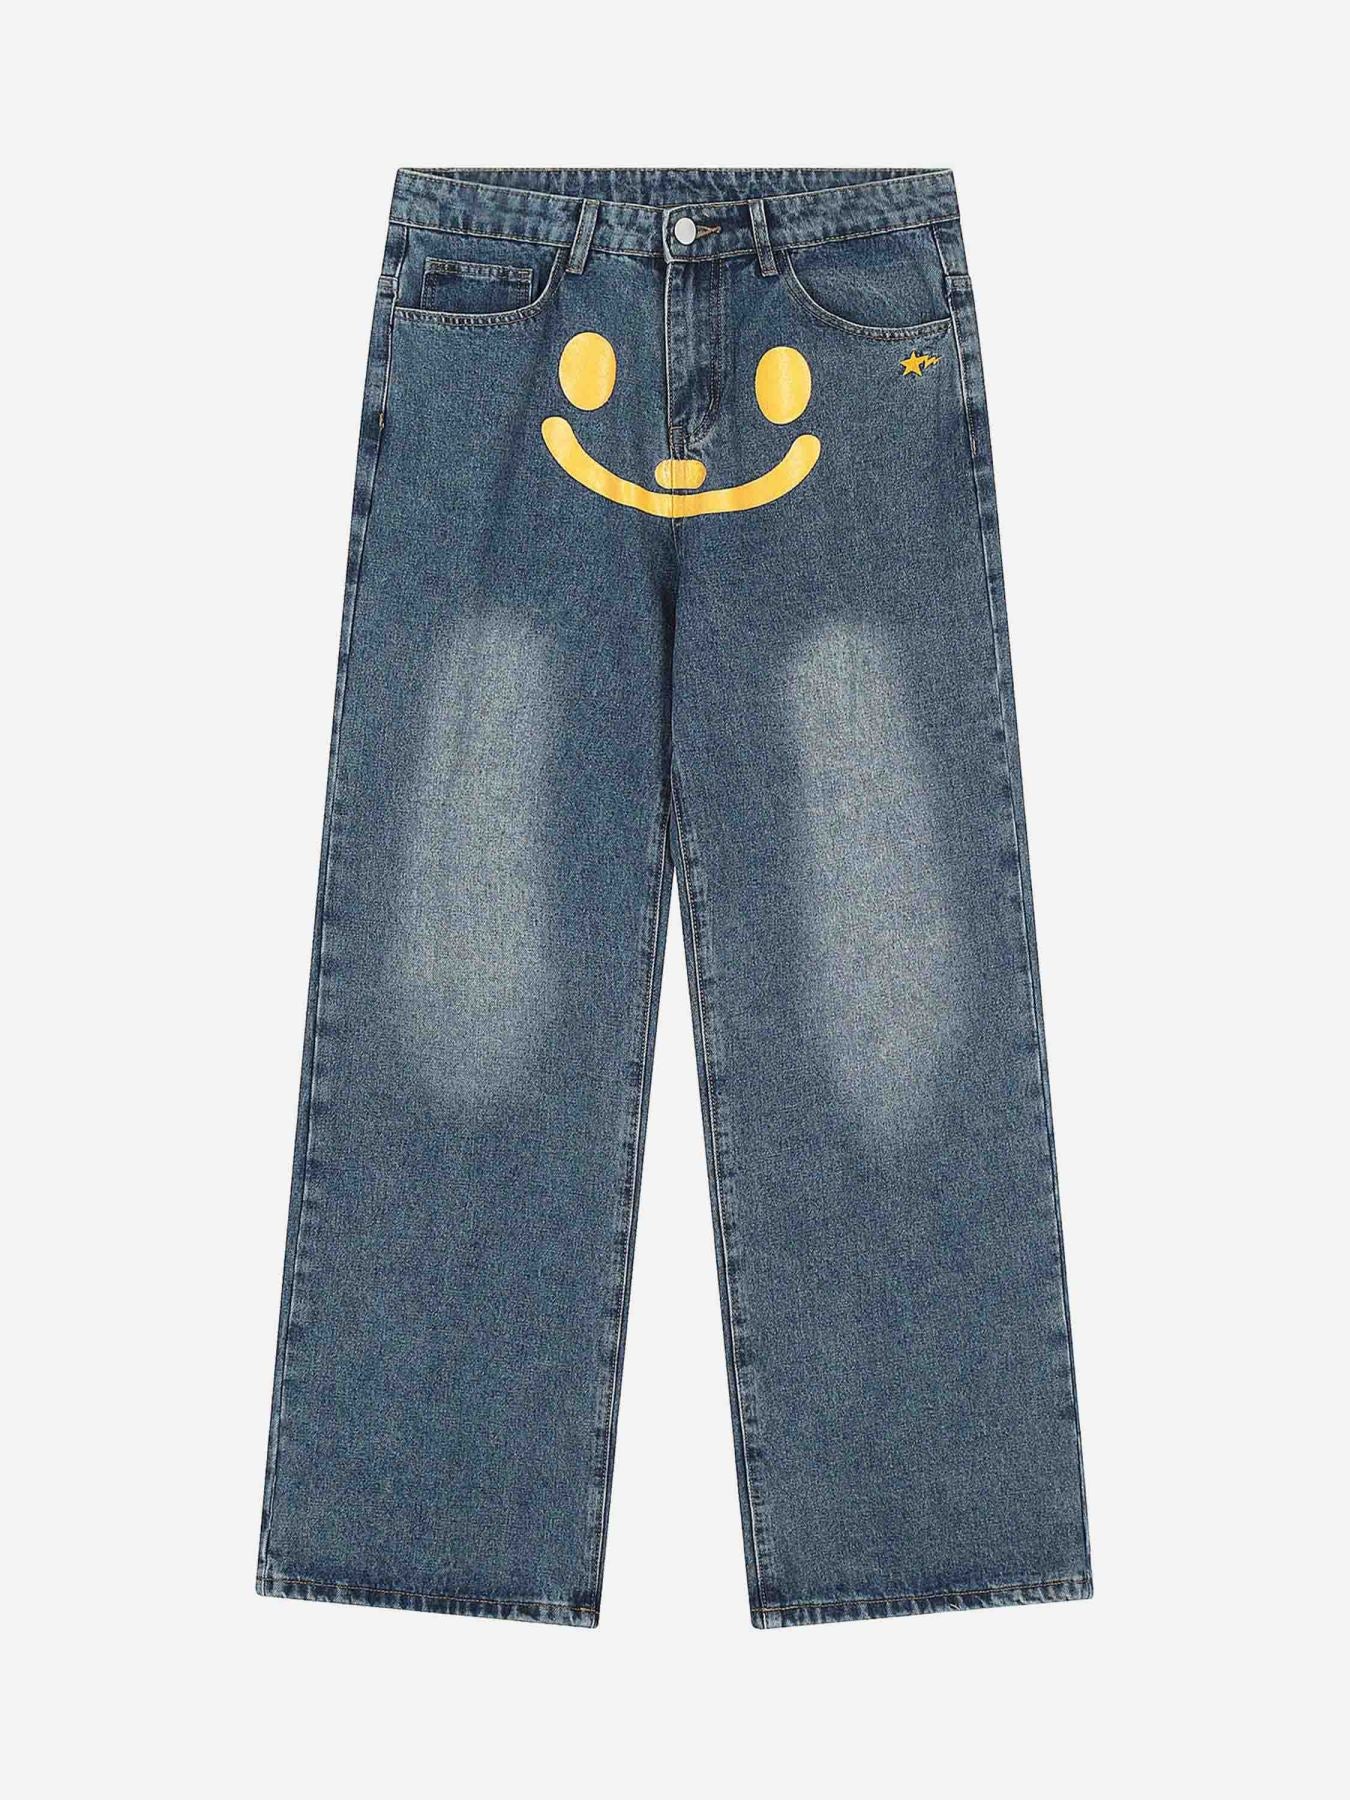 Thesupermade Personality Smiley Face Printed Jeans - 1978